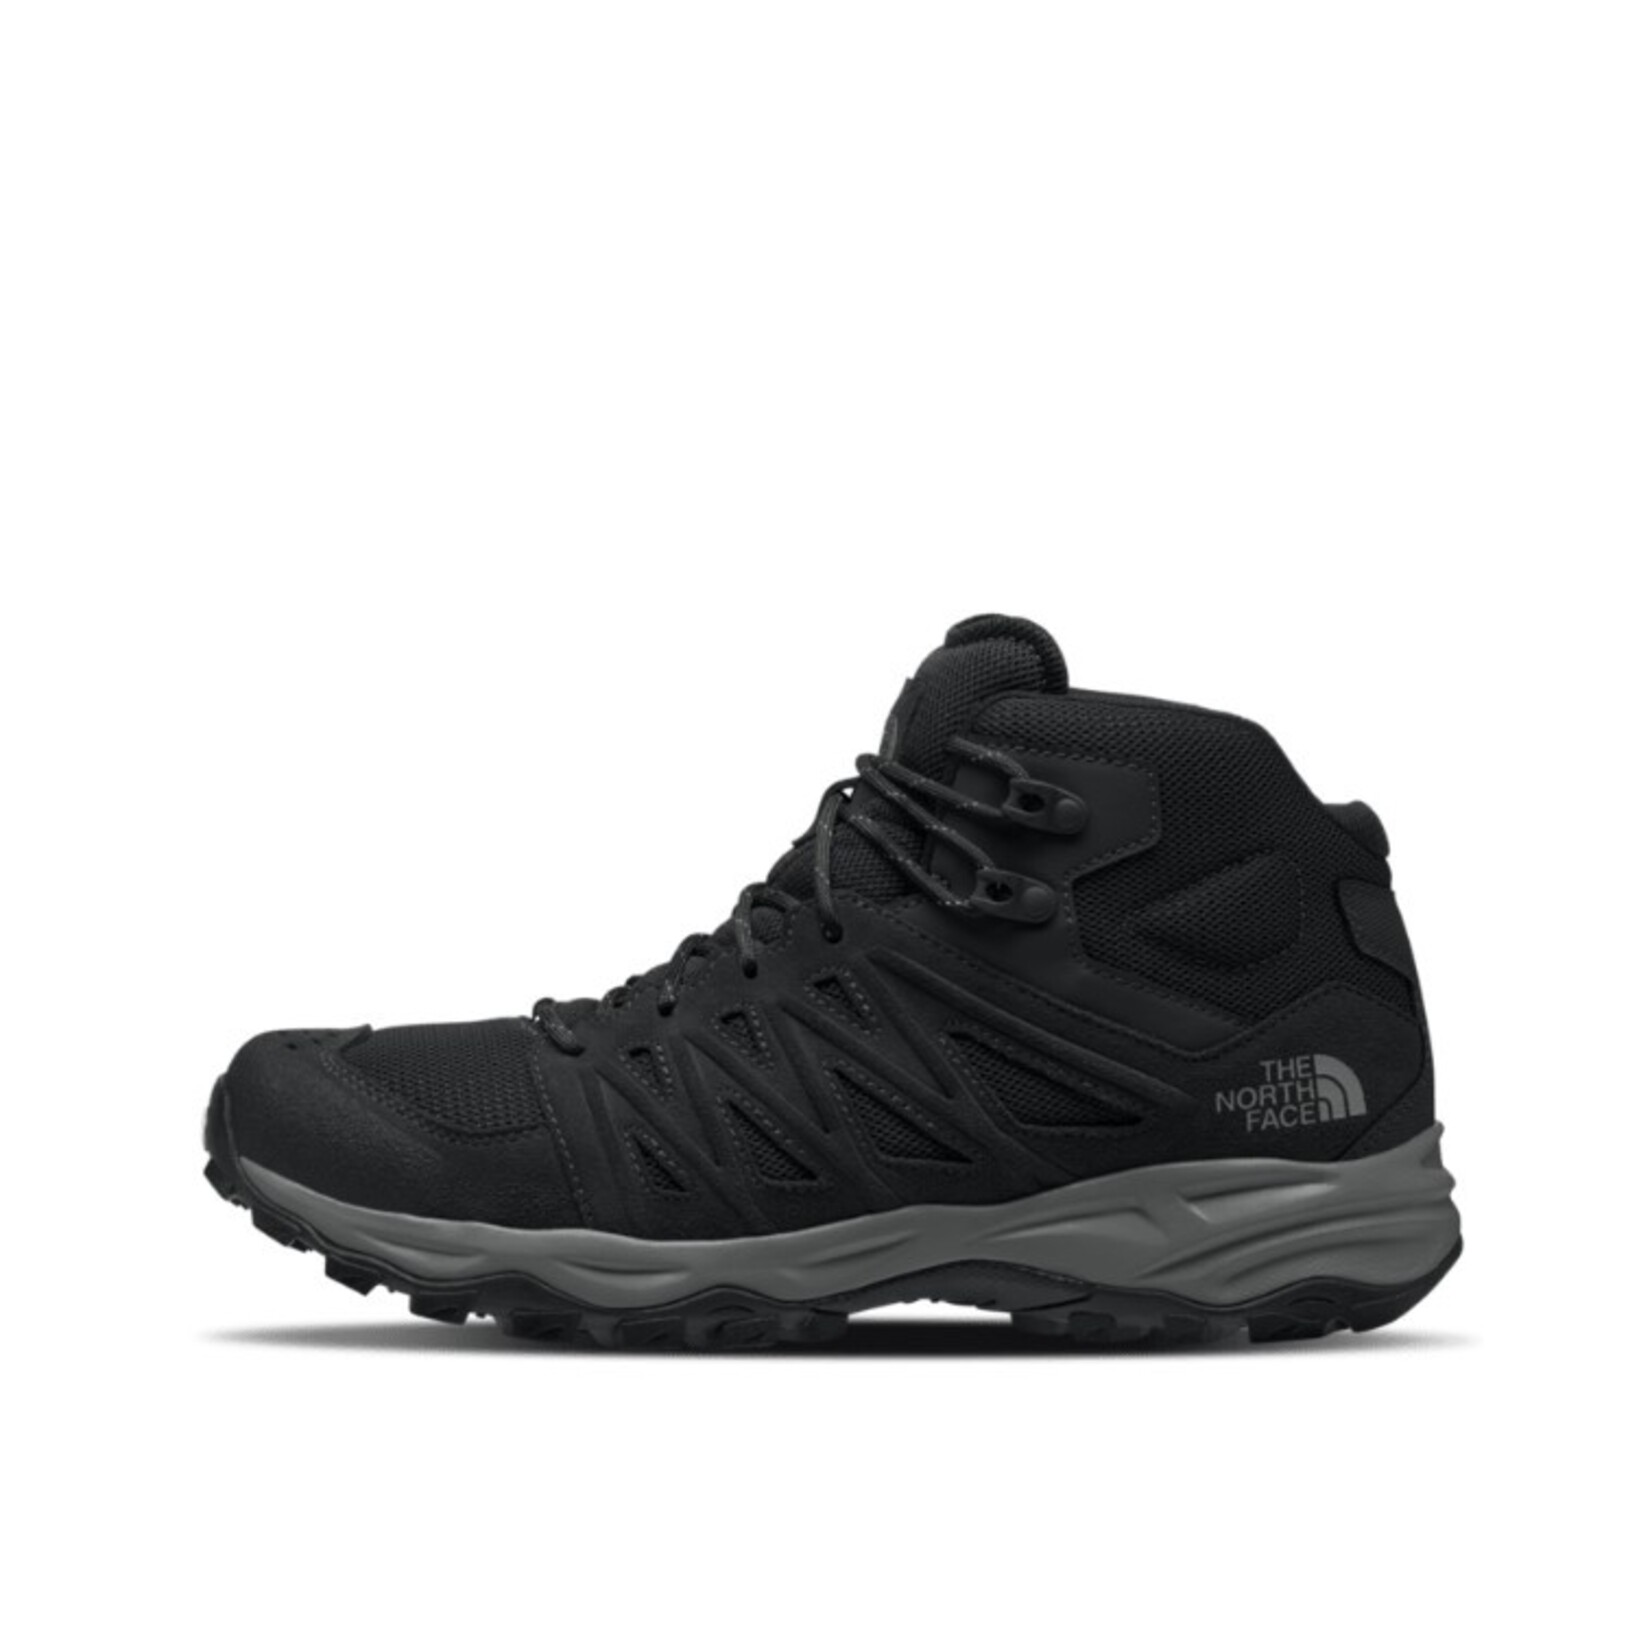 THE NORTH FACE Men's Truckee Mid